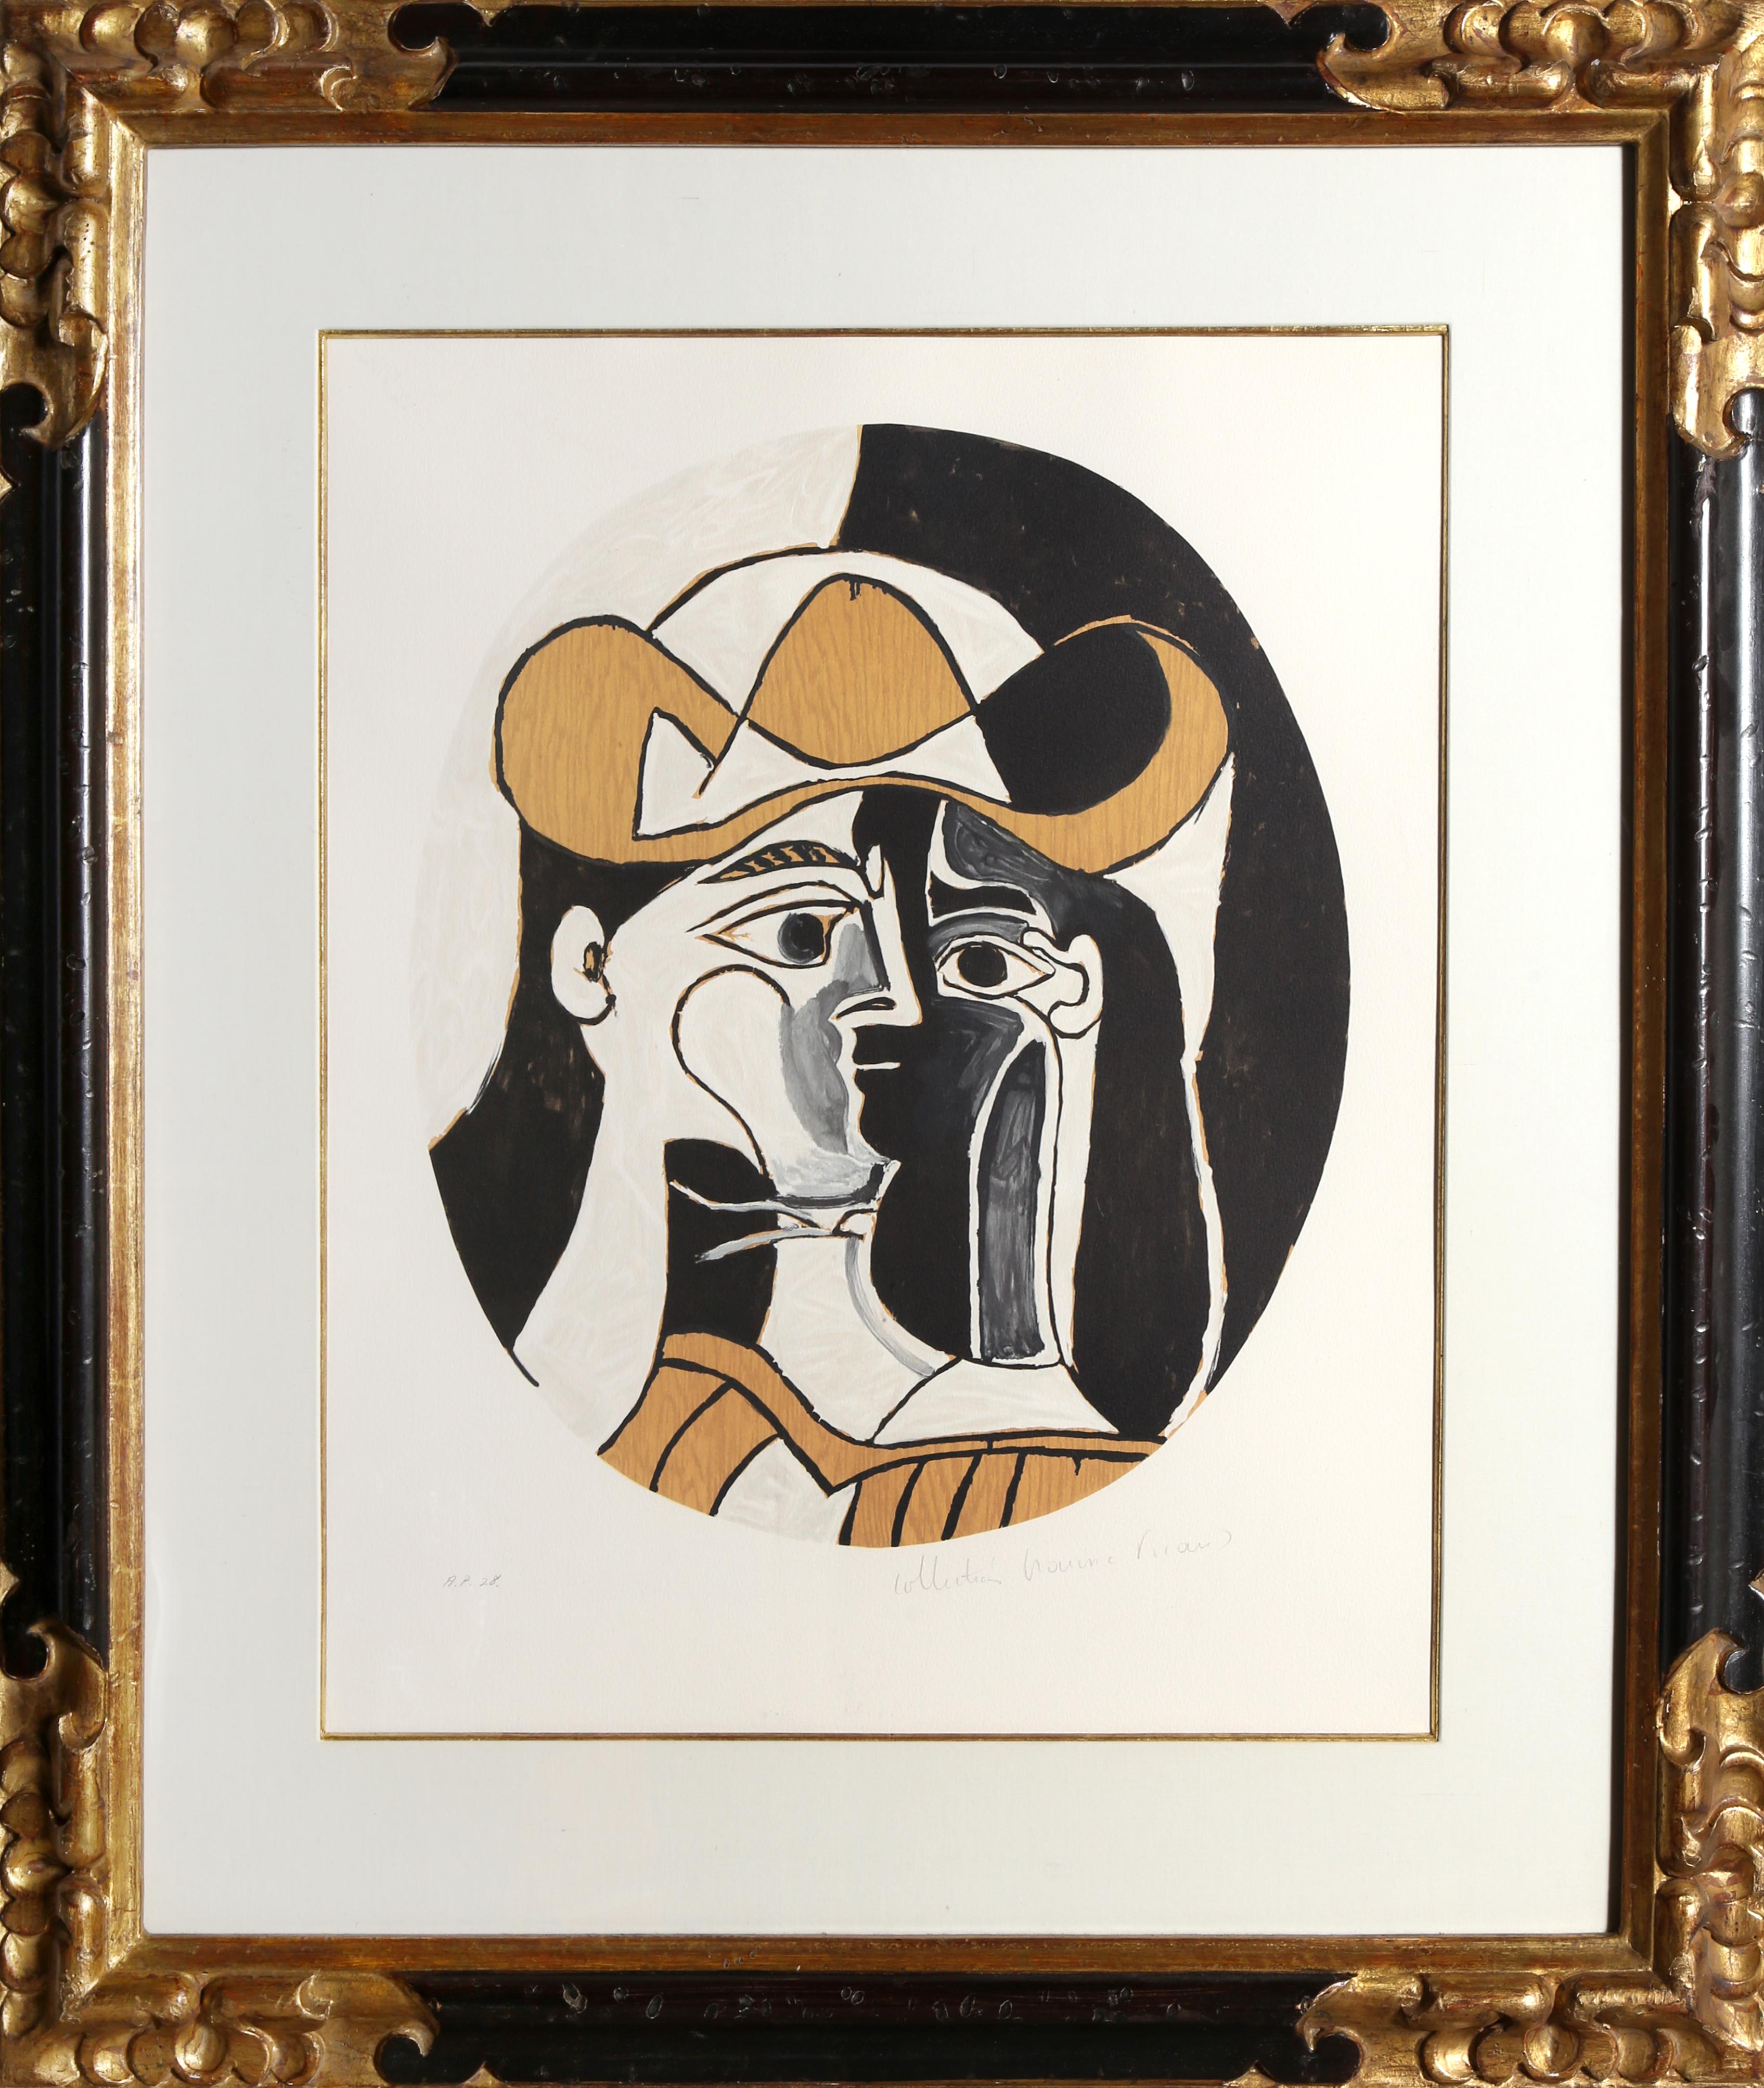 A lithograph from the Marina Picasso Estate Collection after the Pablo Picasso painting "Femme au Chapeau".  The original painting was completed in 1961. In the 1970's after Picasso's death, Marina Picasso, his granddaughter, authorized the creation